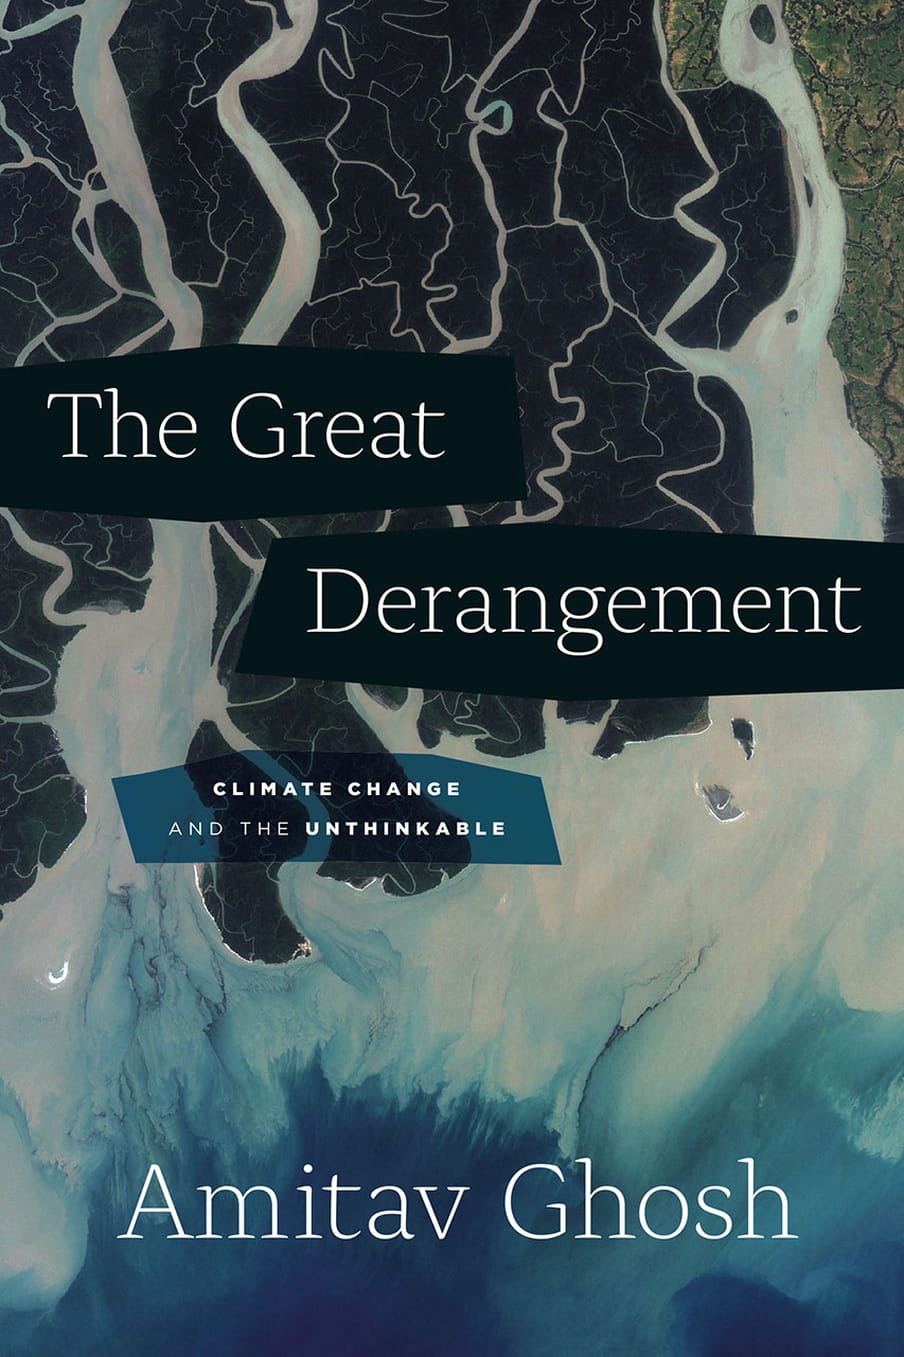 Book cover of ‘The Great Derangement’, depicting a landscape from above 